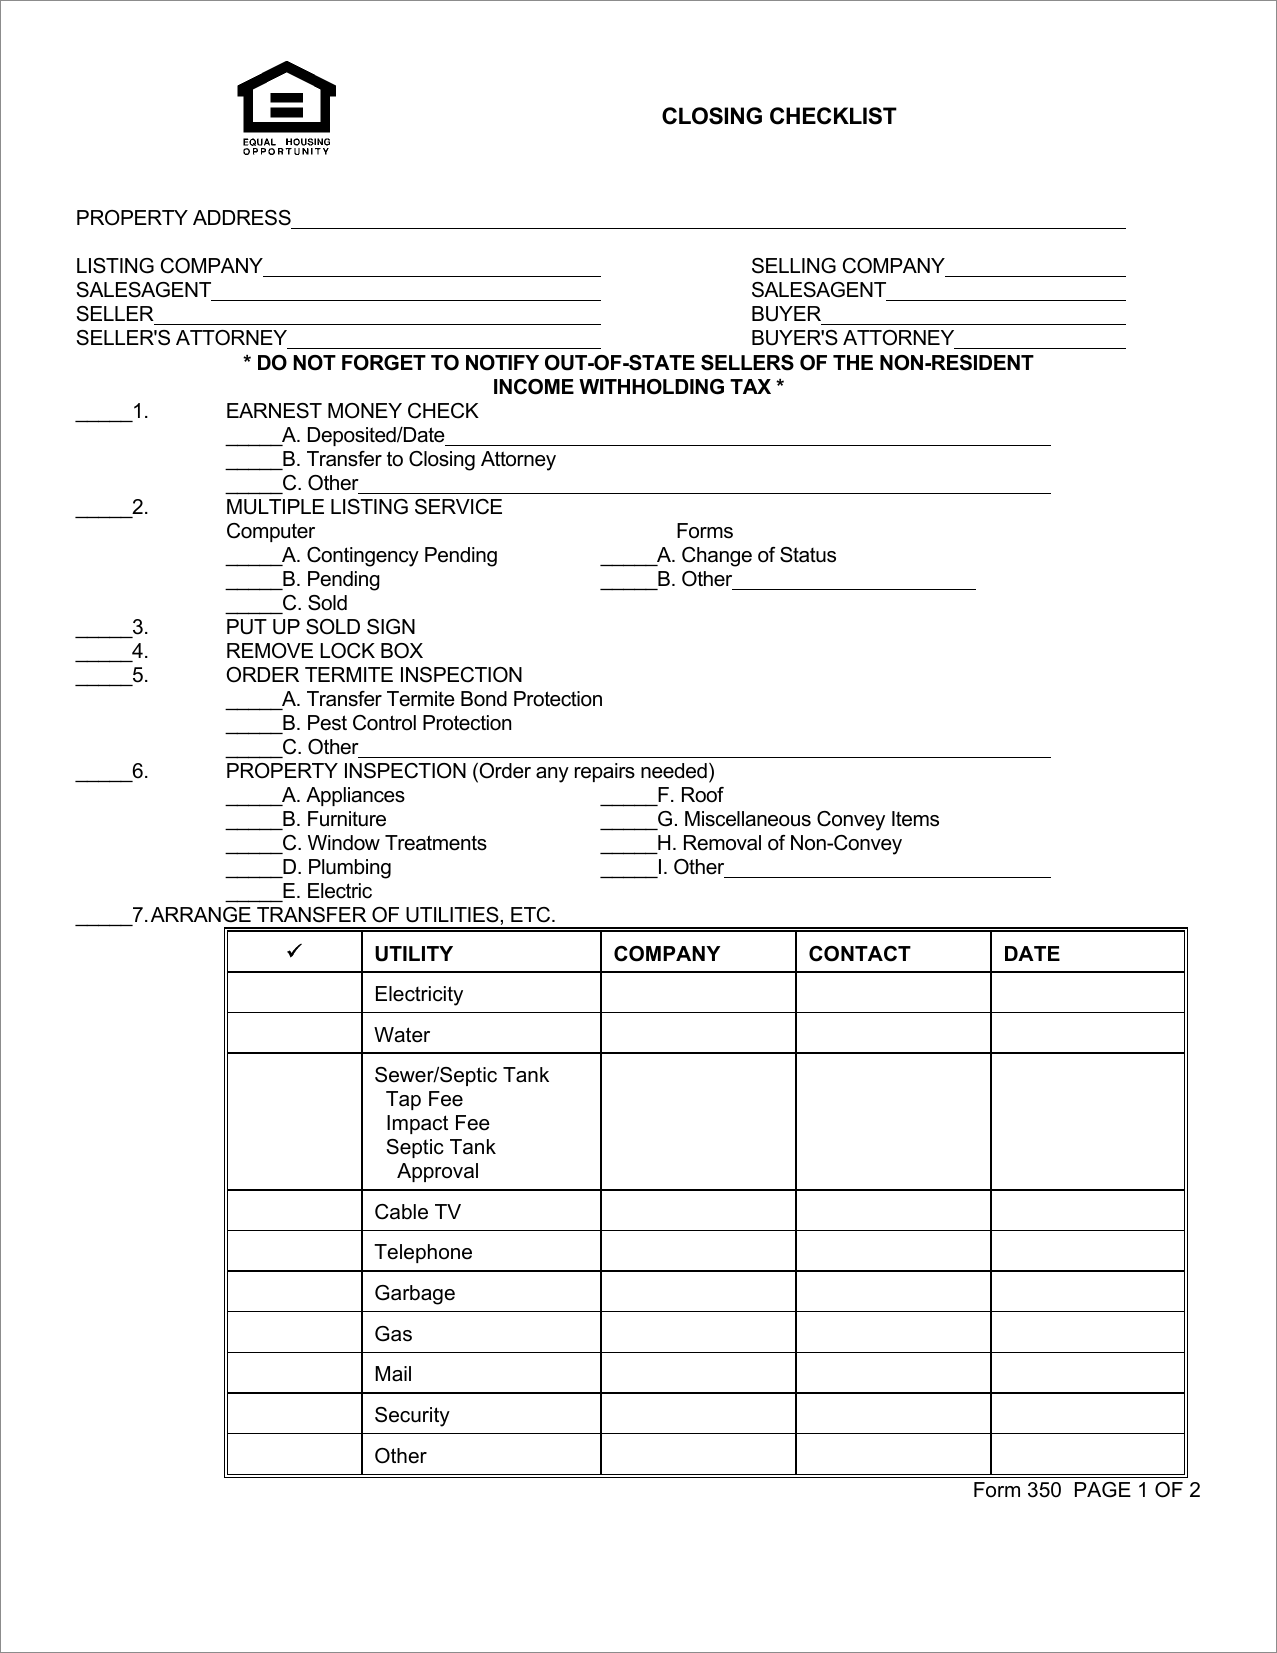 sample of real estate closing checklist template